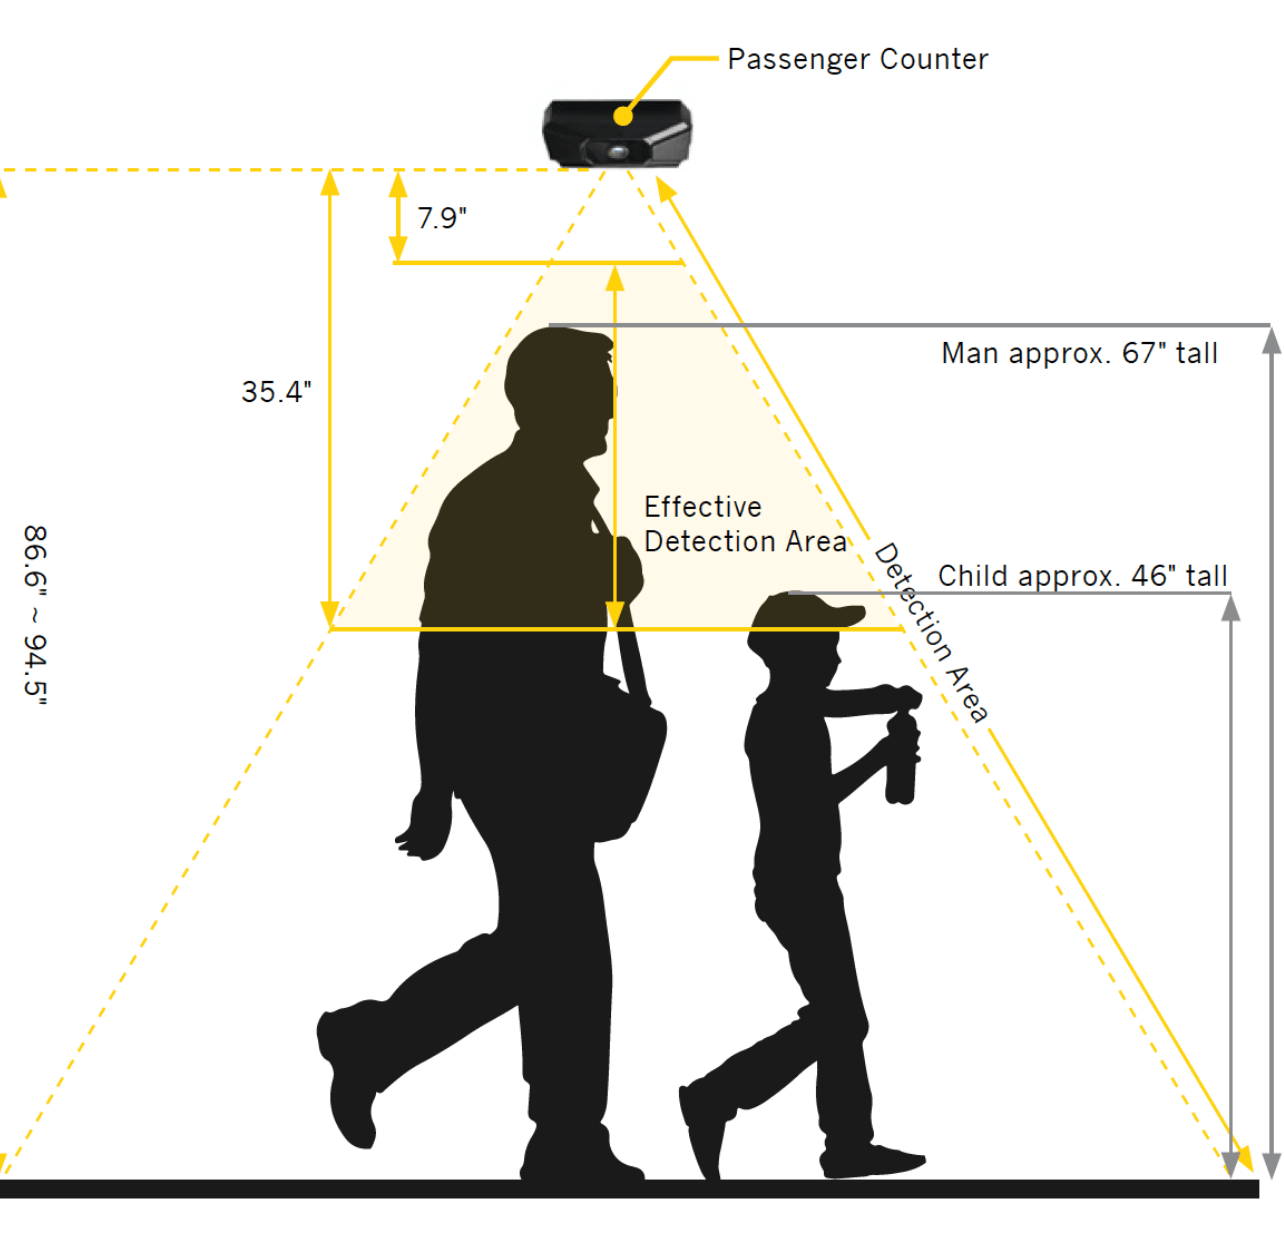 infographic displaying effective detection area of pccamera